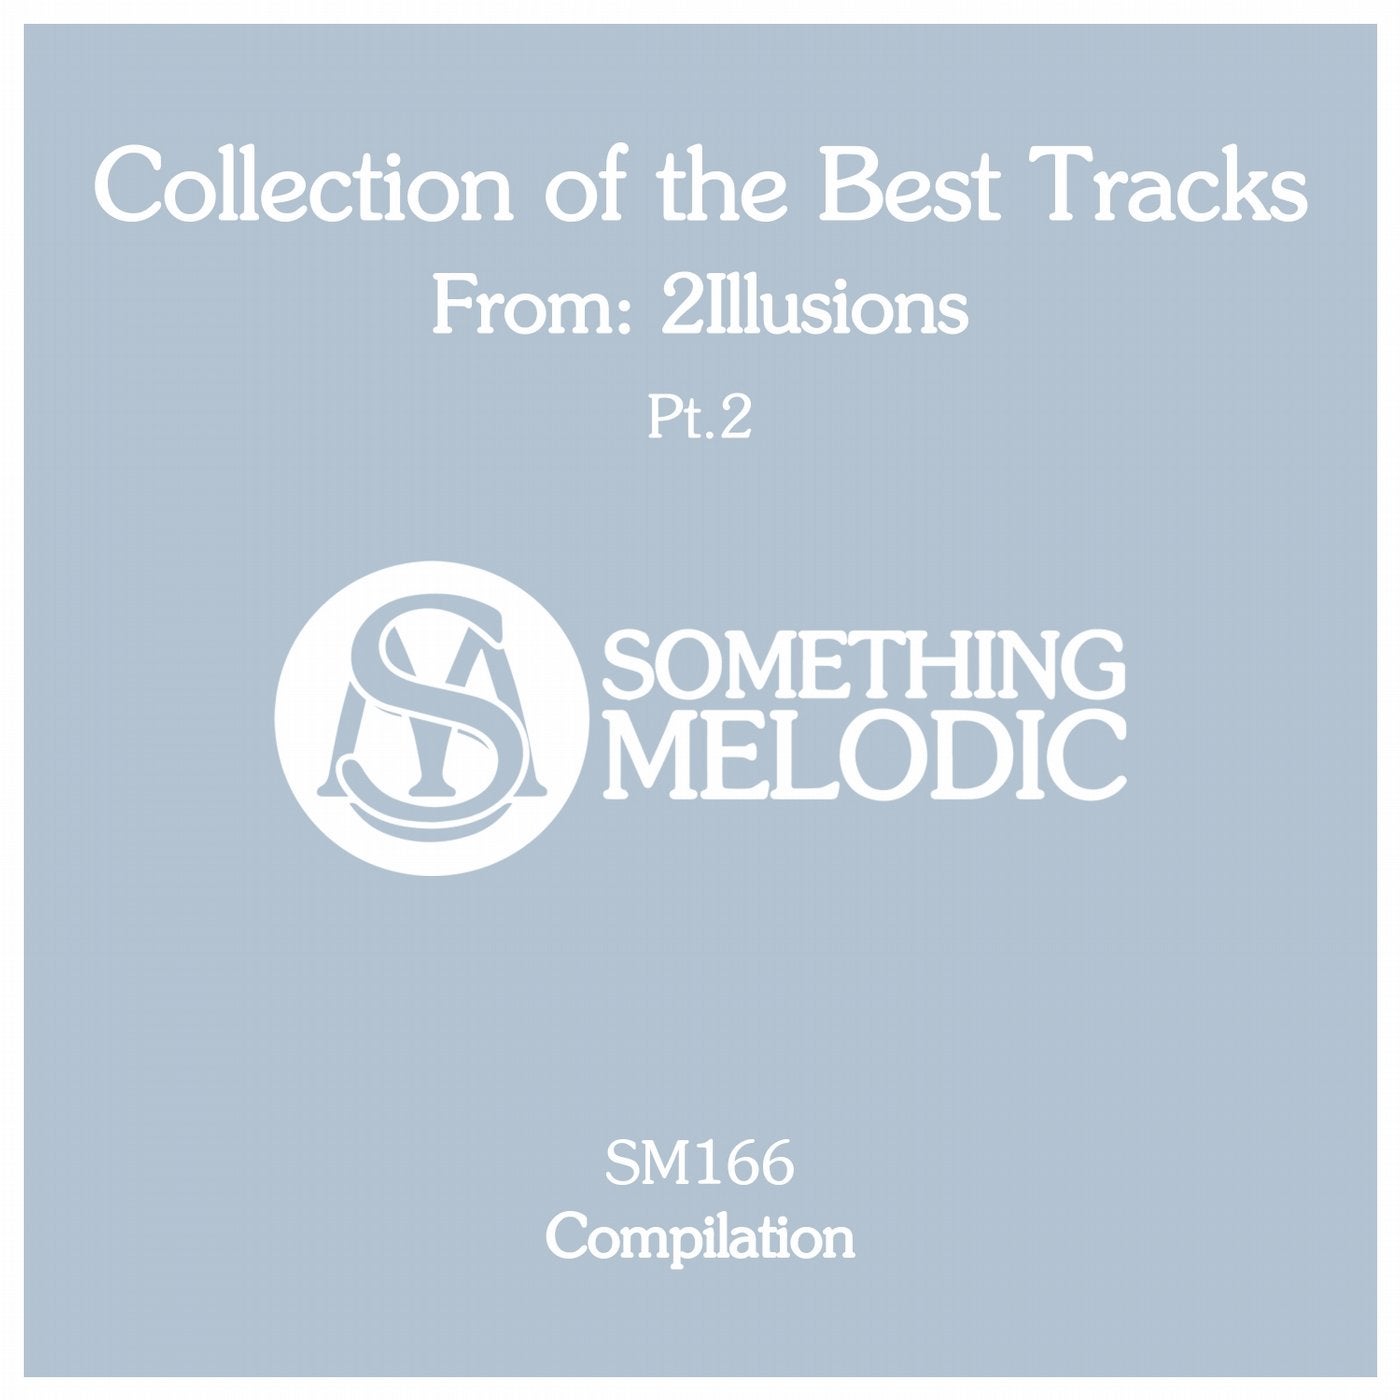 Collection of the Best Tracks From: 2Illusions, Pt. 2